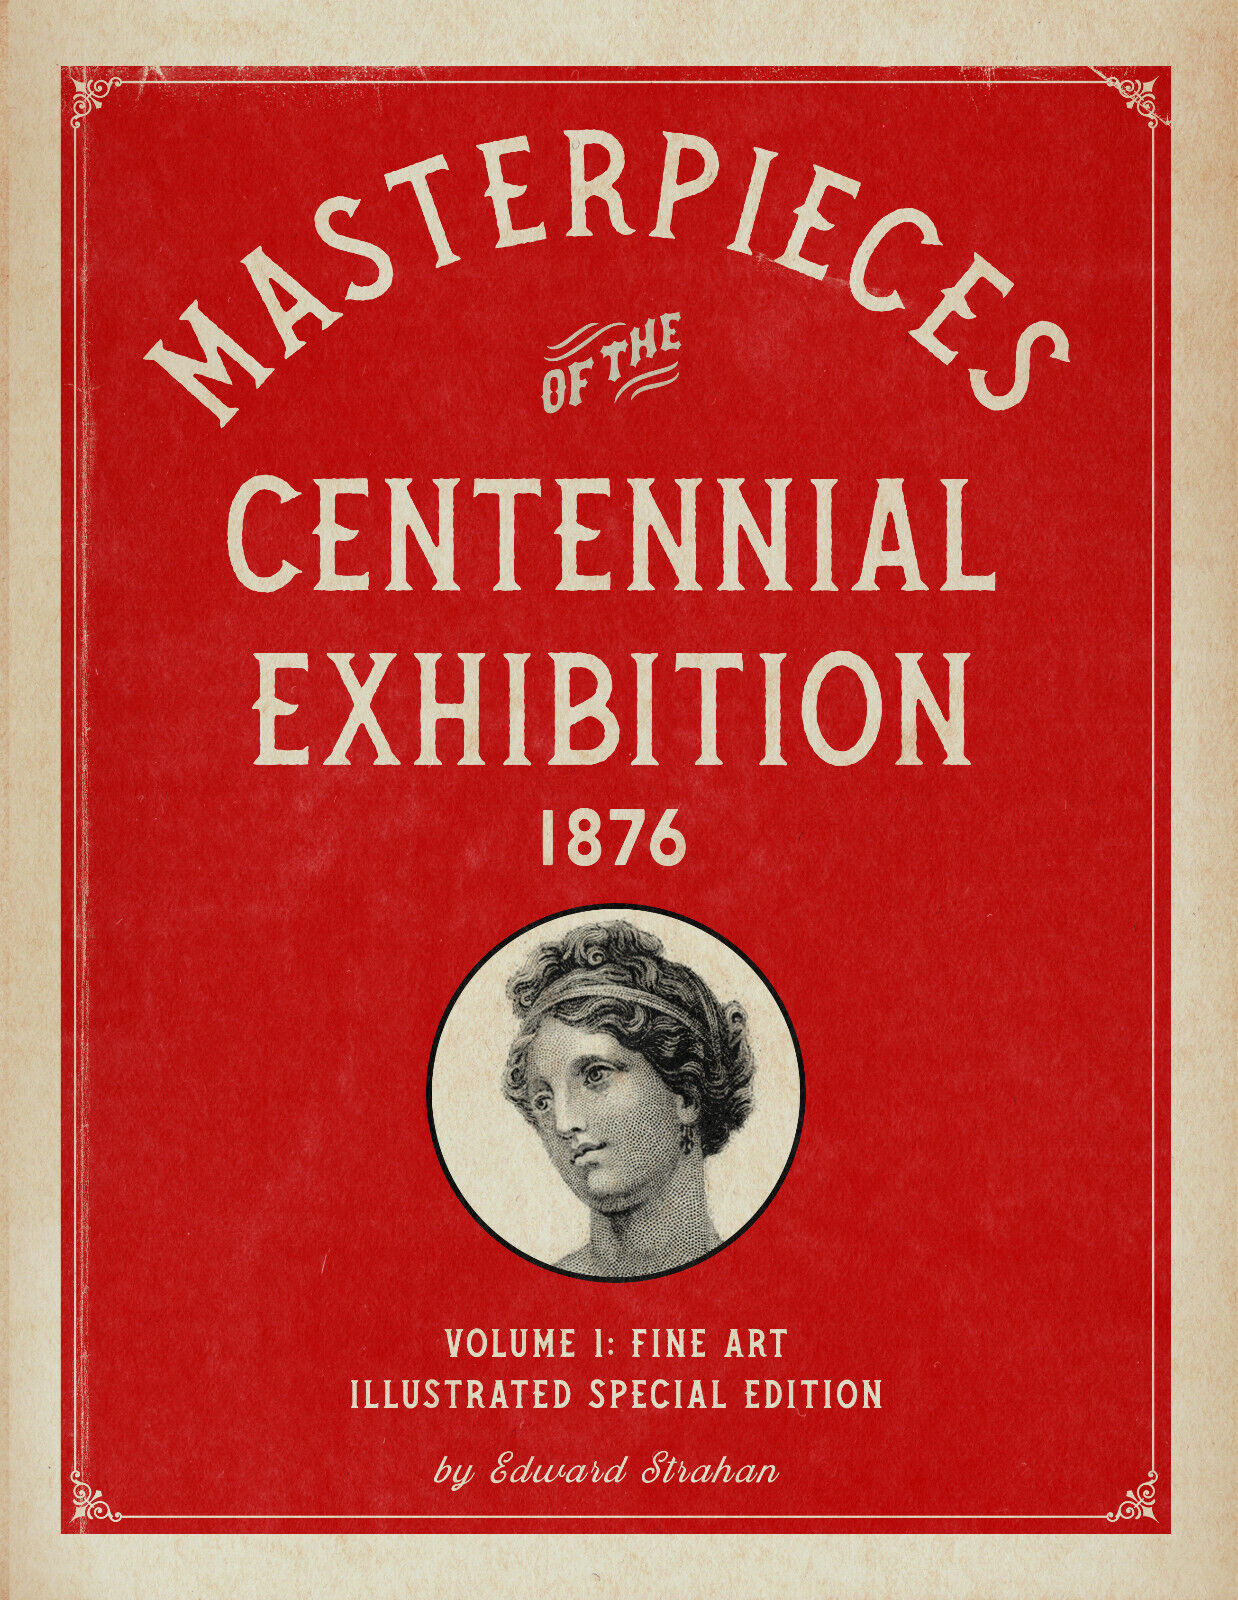 Masterpieces of the Centennial Exhibition 1876 Volume 1: Special Edition *NEW*